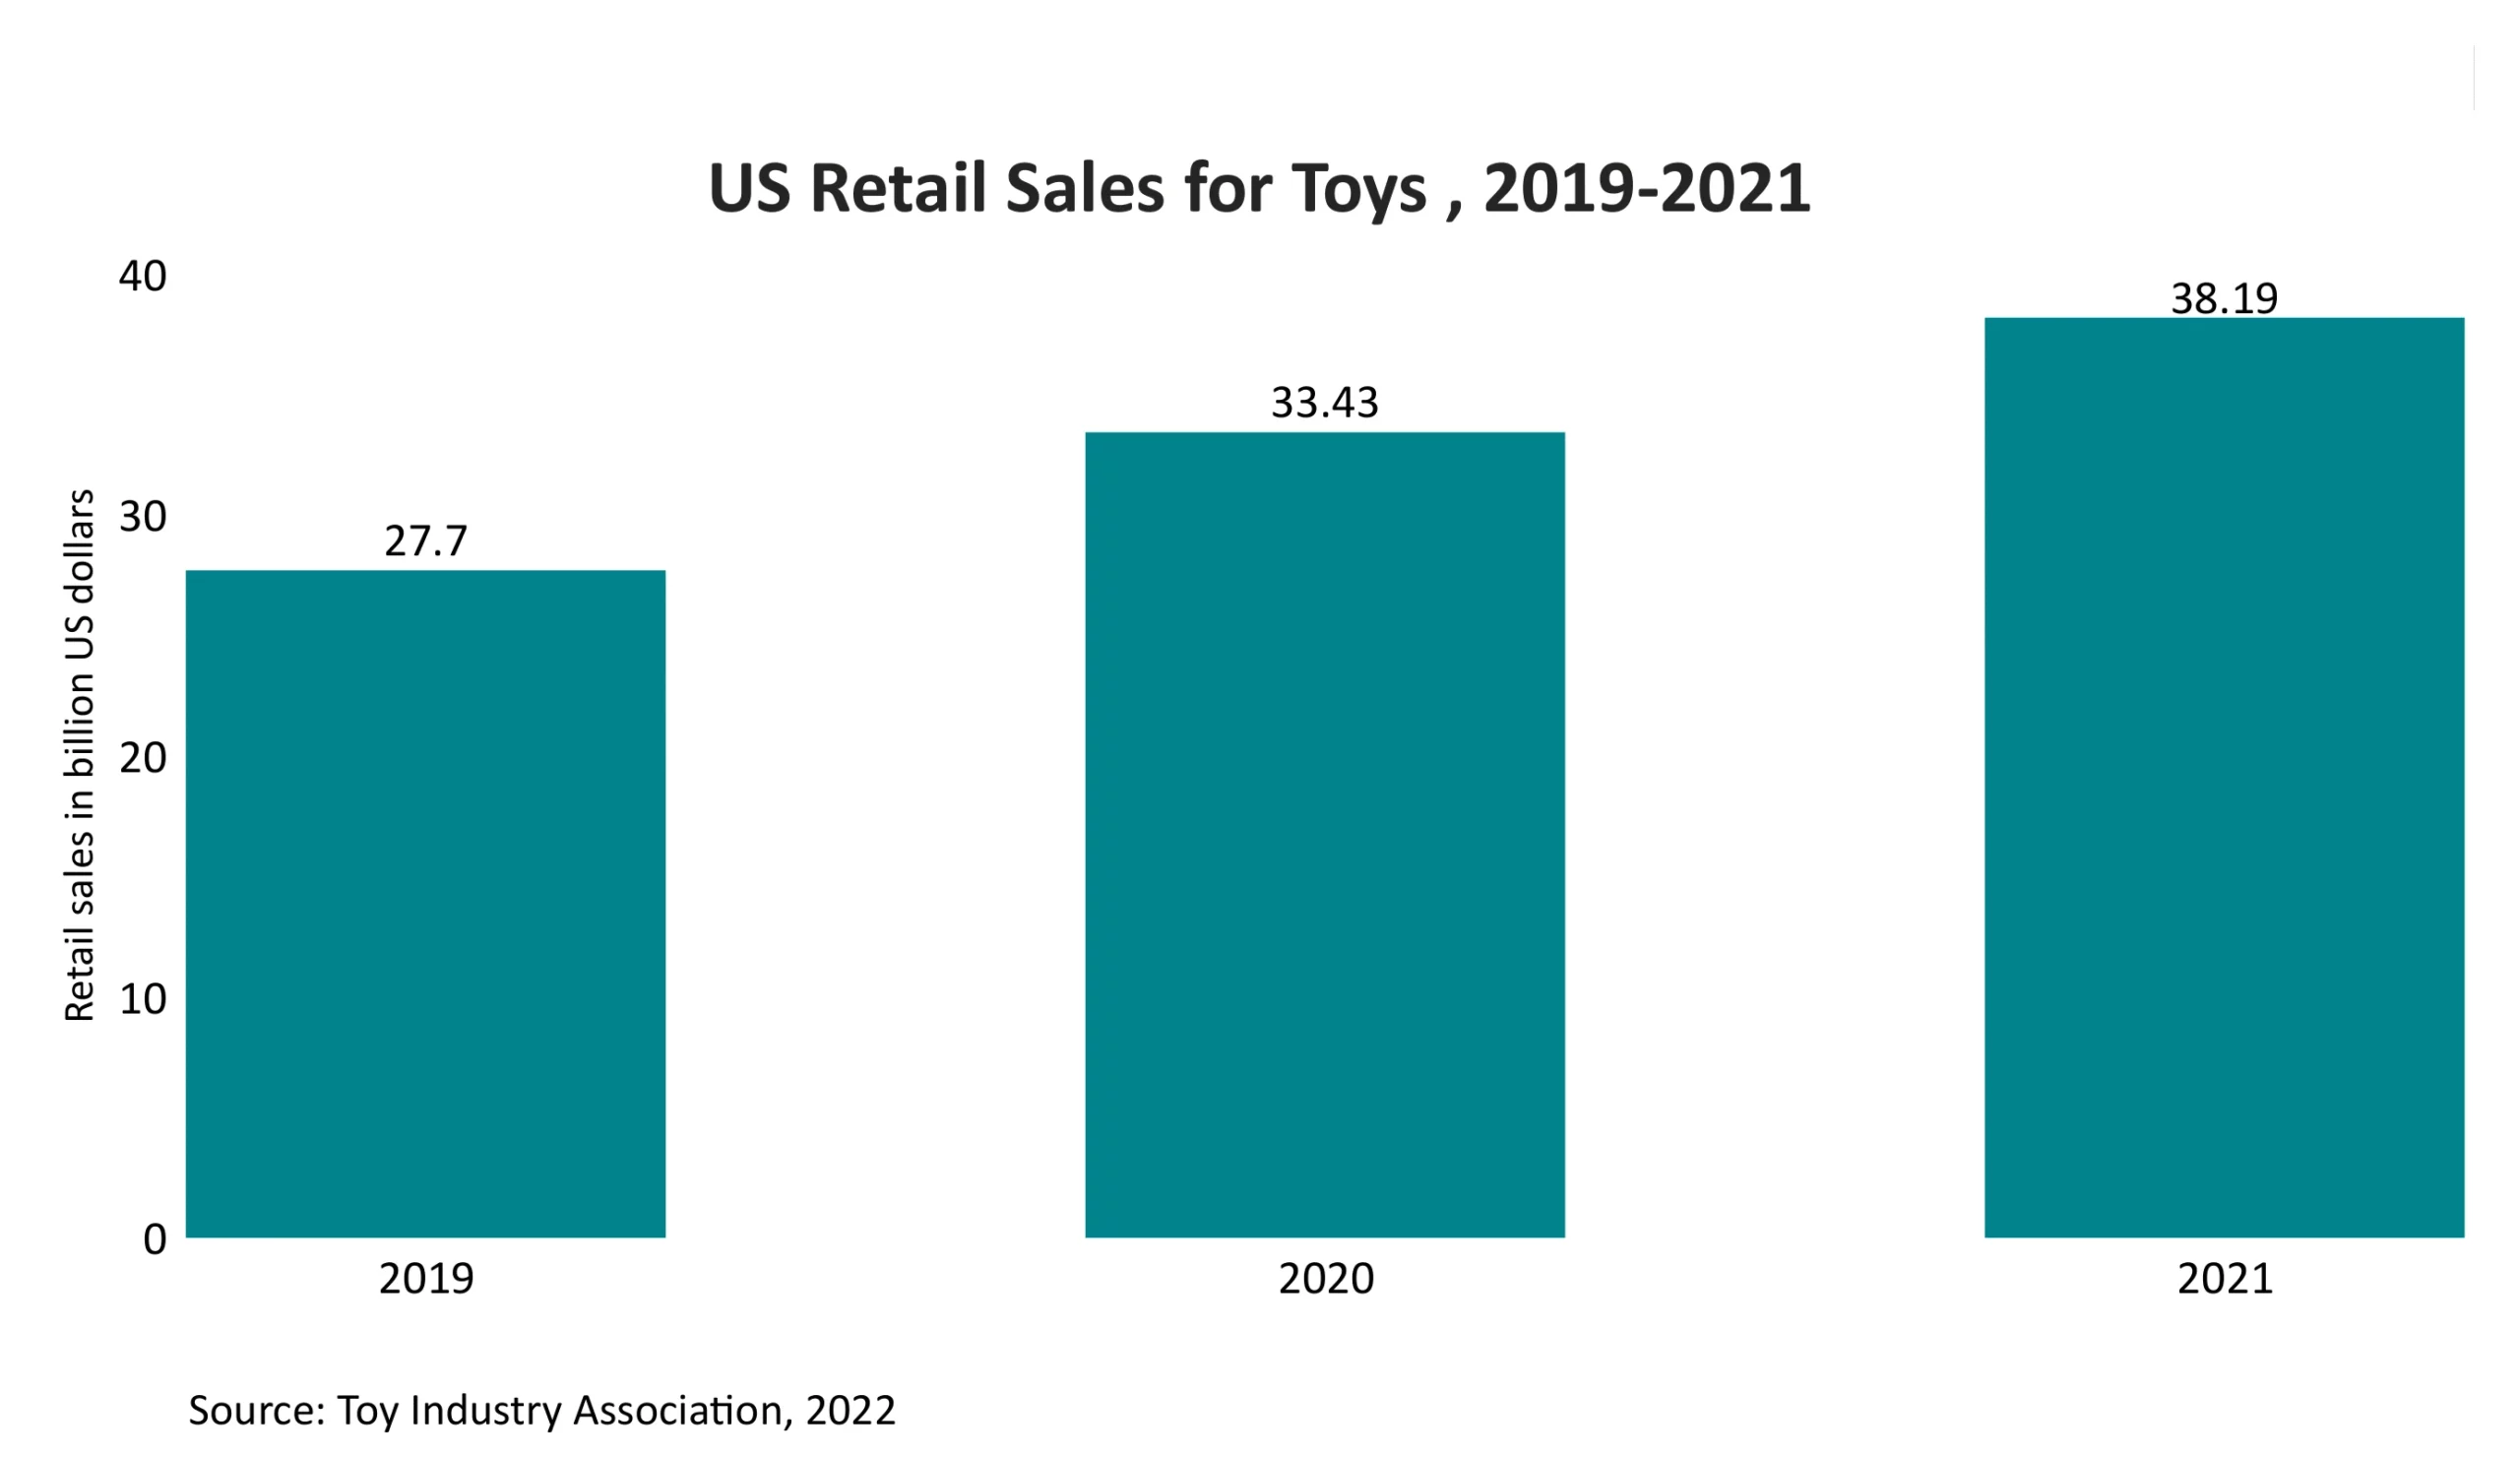 Retail sales for toys in the US from 2019 to 2021